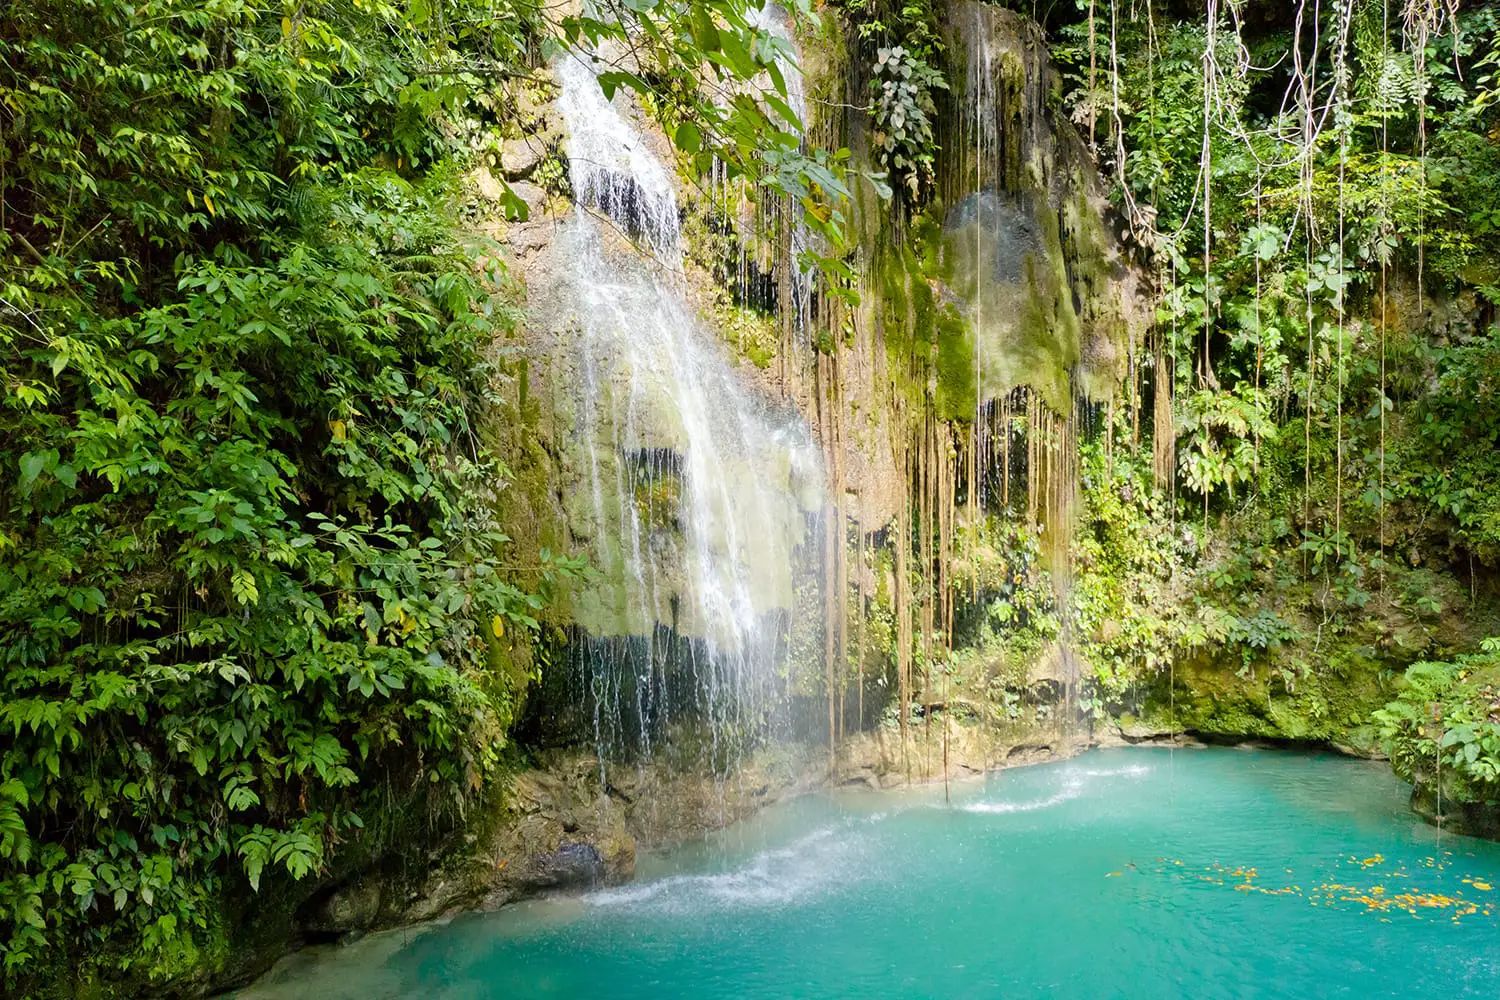 Cambais waterfalls in a mountain gorge in the tropical jungle, Philippines, Cebu